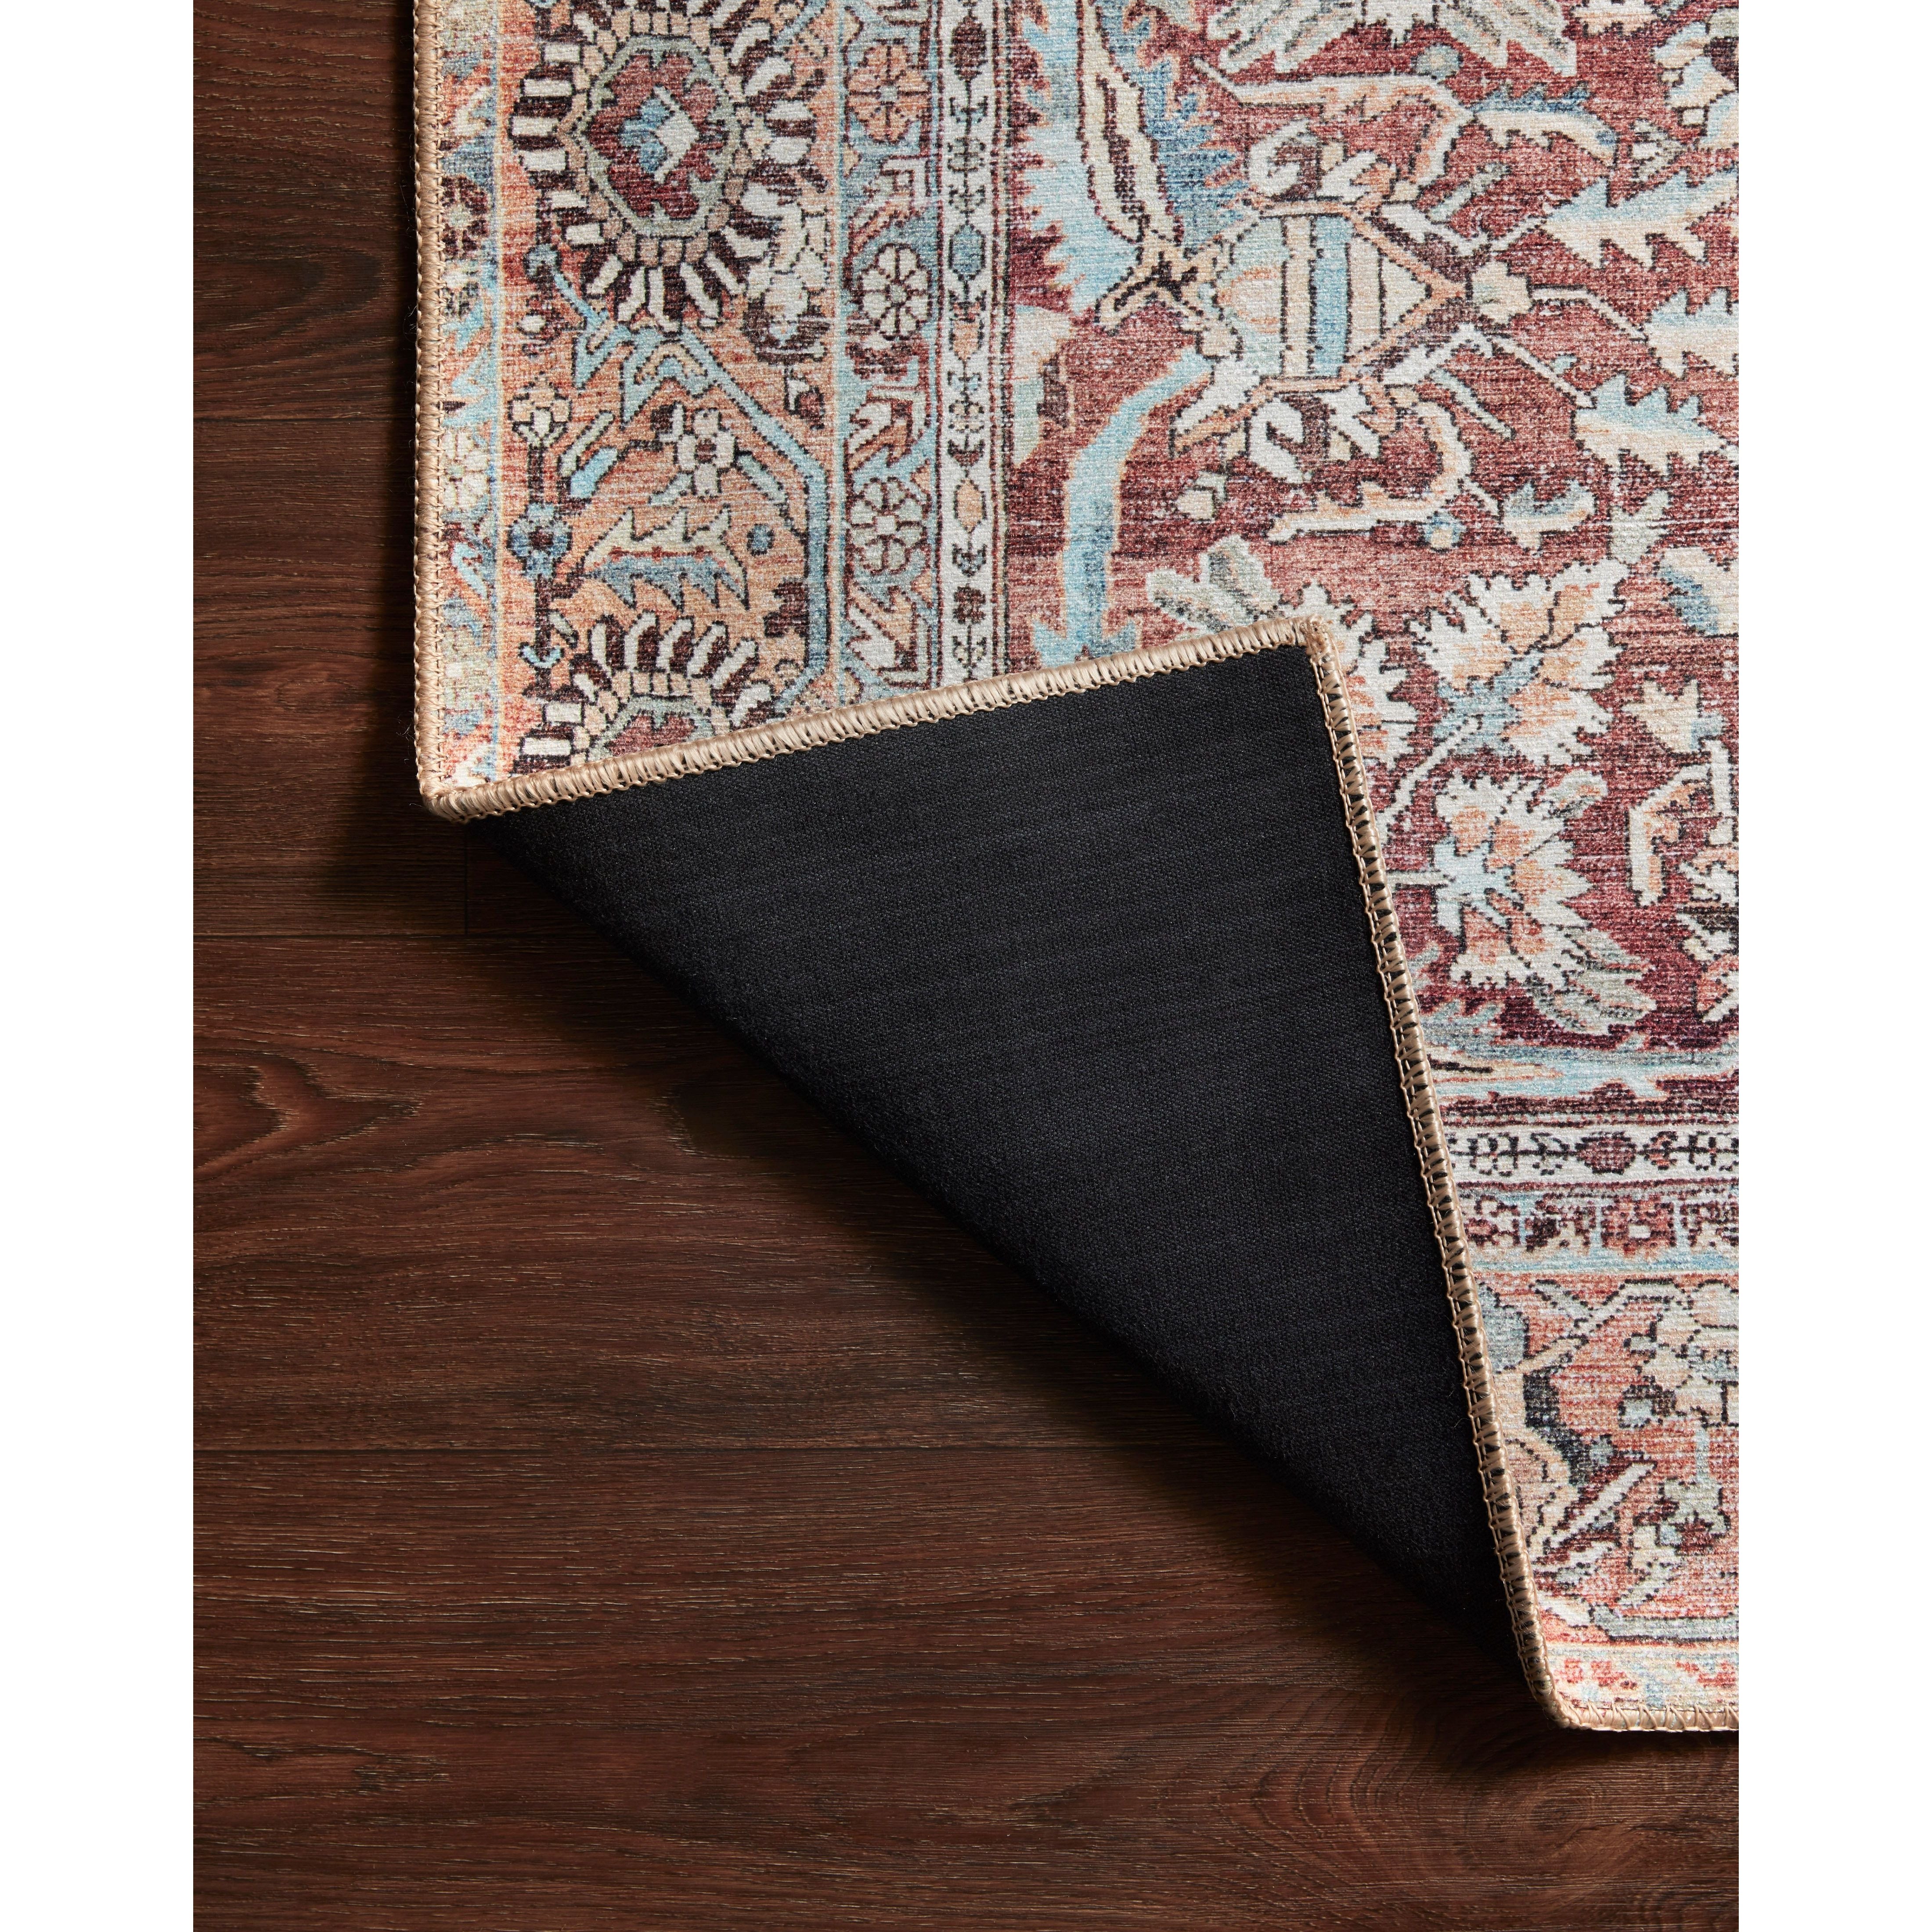 The Wynter Tomato / Teal area rug showcases a one-of-a-kind vintage or antique area rug look power-loomed of 100% polyester. This rug brings in tones of red, orange, blue, and ivory. The rug is ideal for high traffic areas due to the rug's durability for living rooms, dining rooms, kitchens, hallways, and entryways.